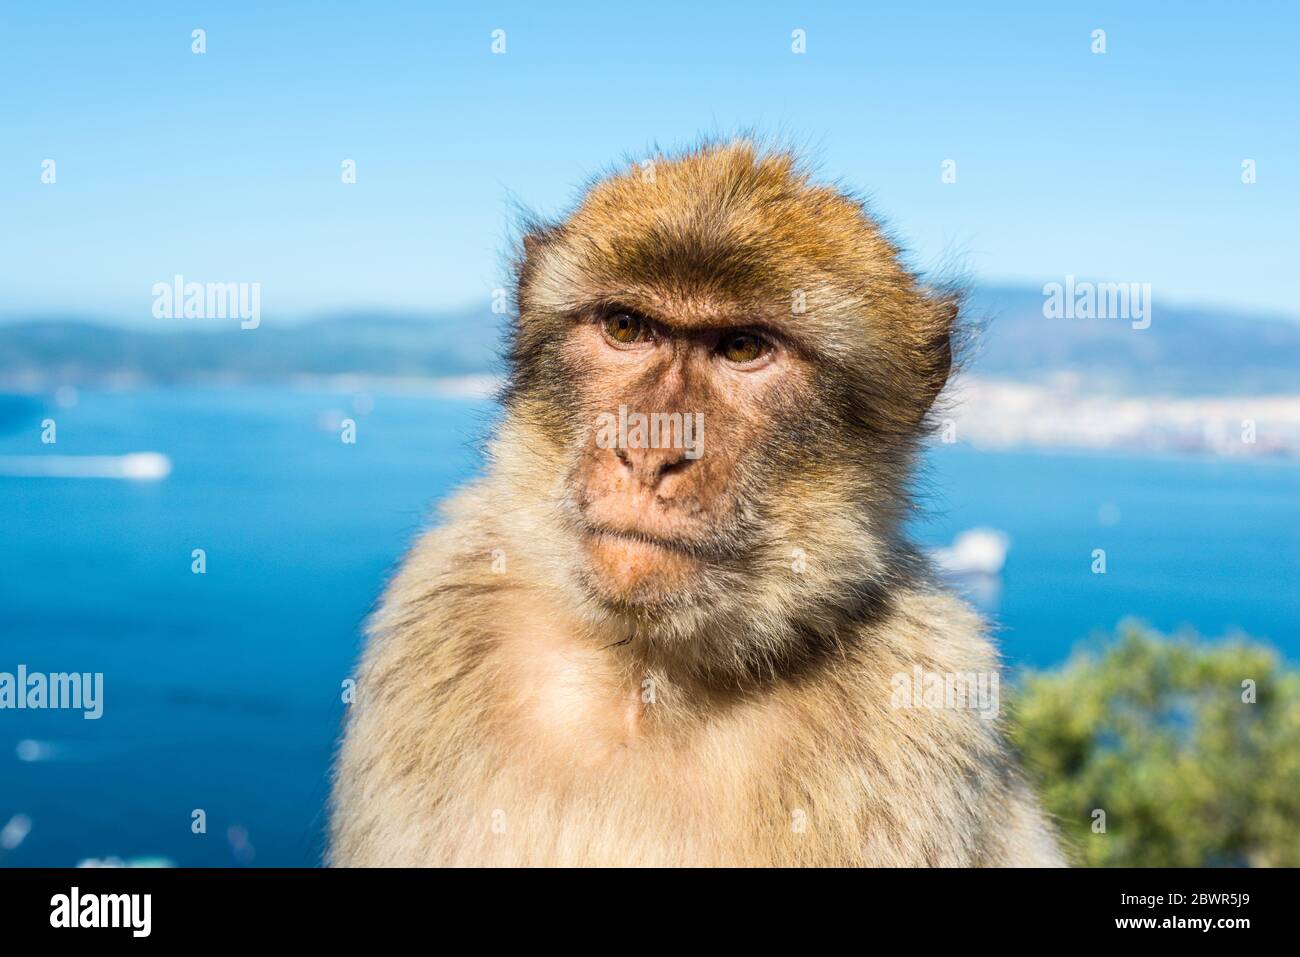 Gibraltar Barbary macaque monkey portrait with strait view in background. Stock Photo